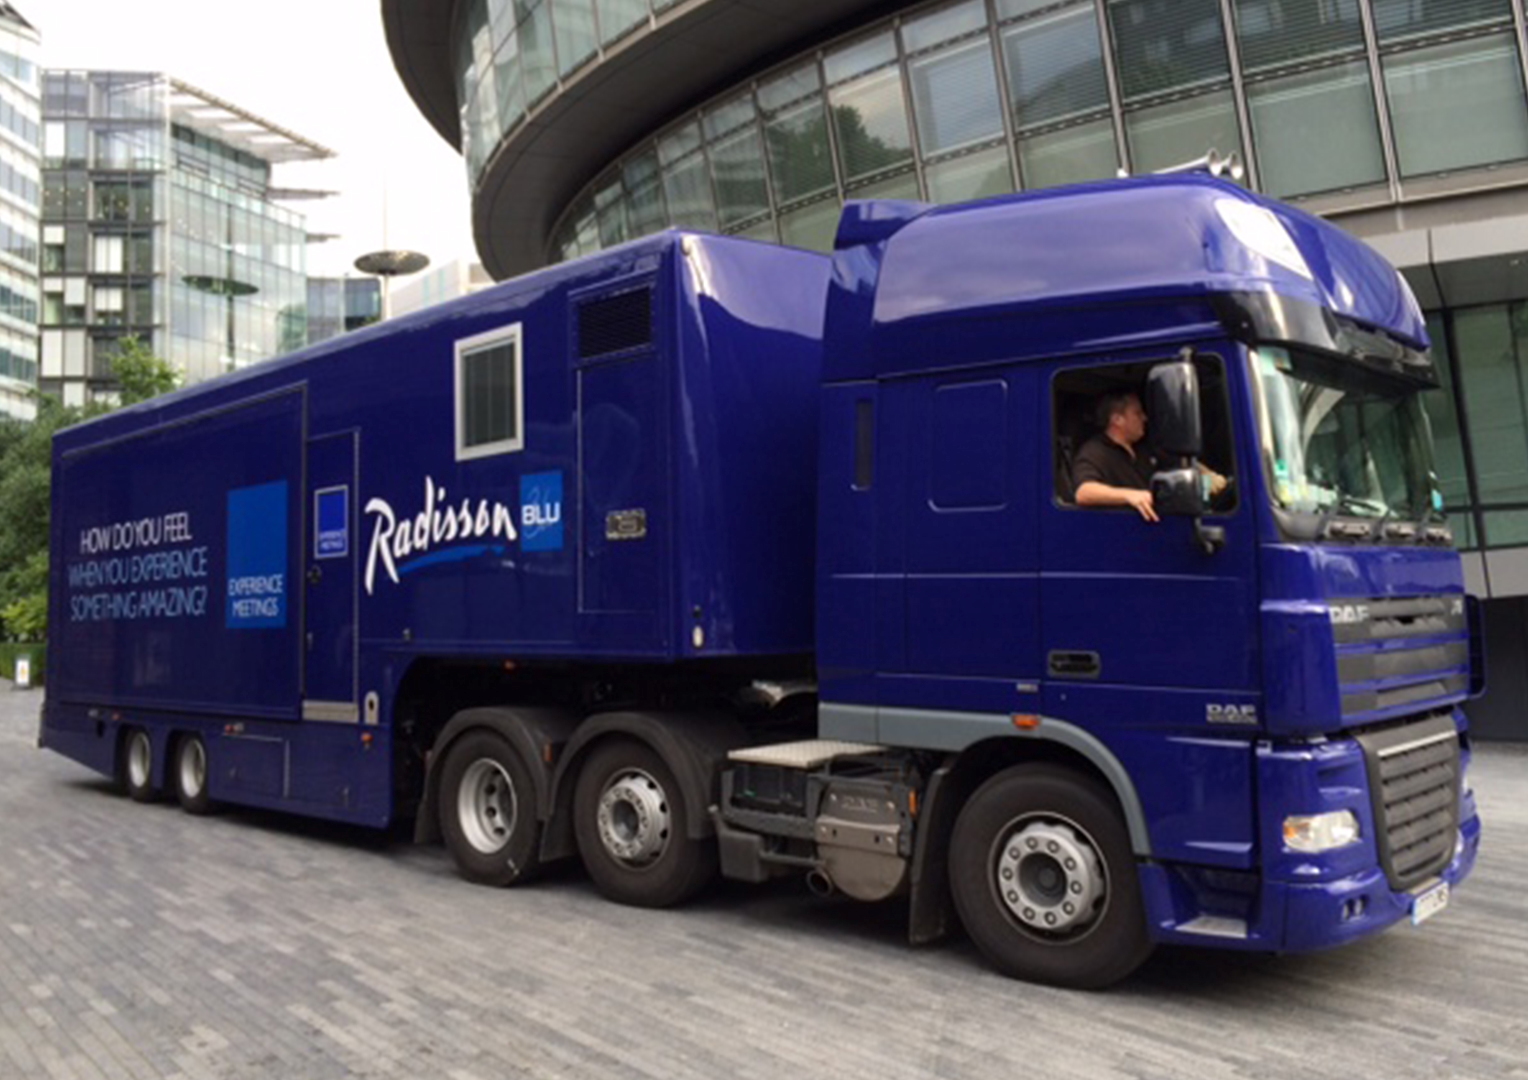 Radisson Blu Hotels. Experience Meetings Truck. Large format branding. Creative artwork and graphic design.